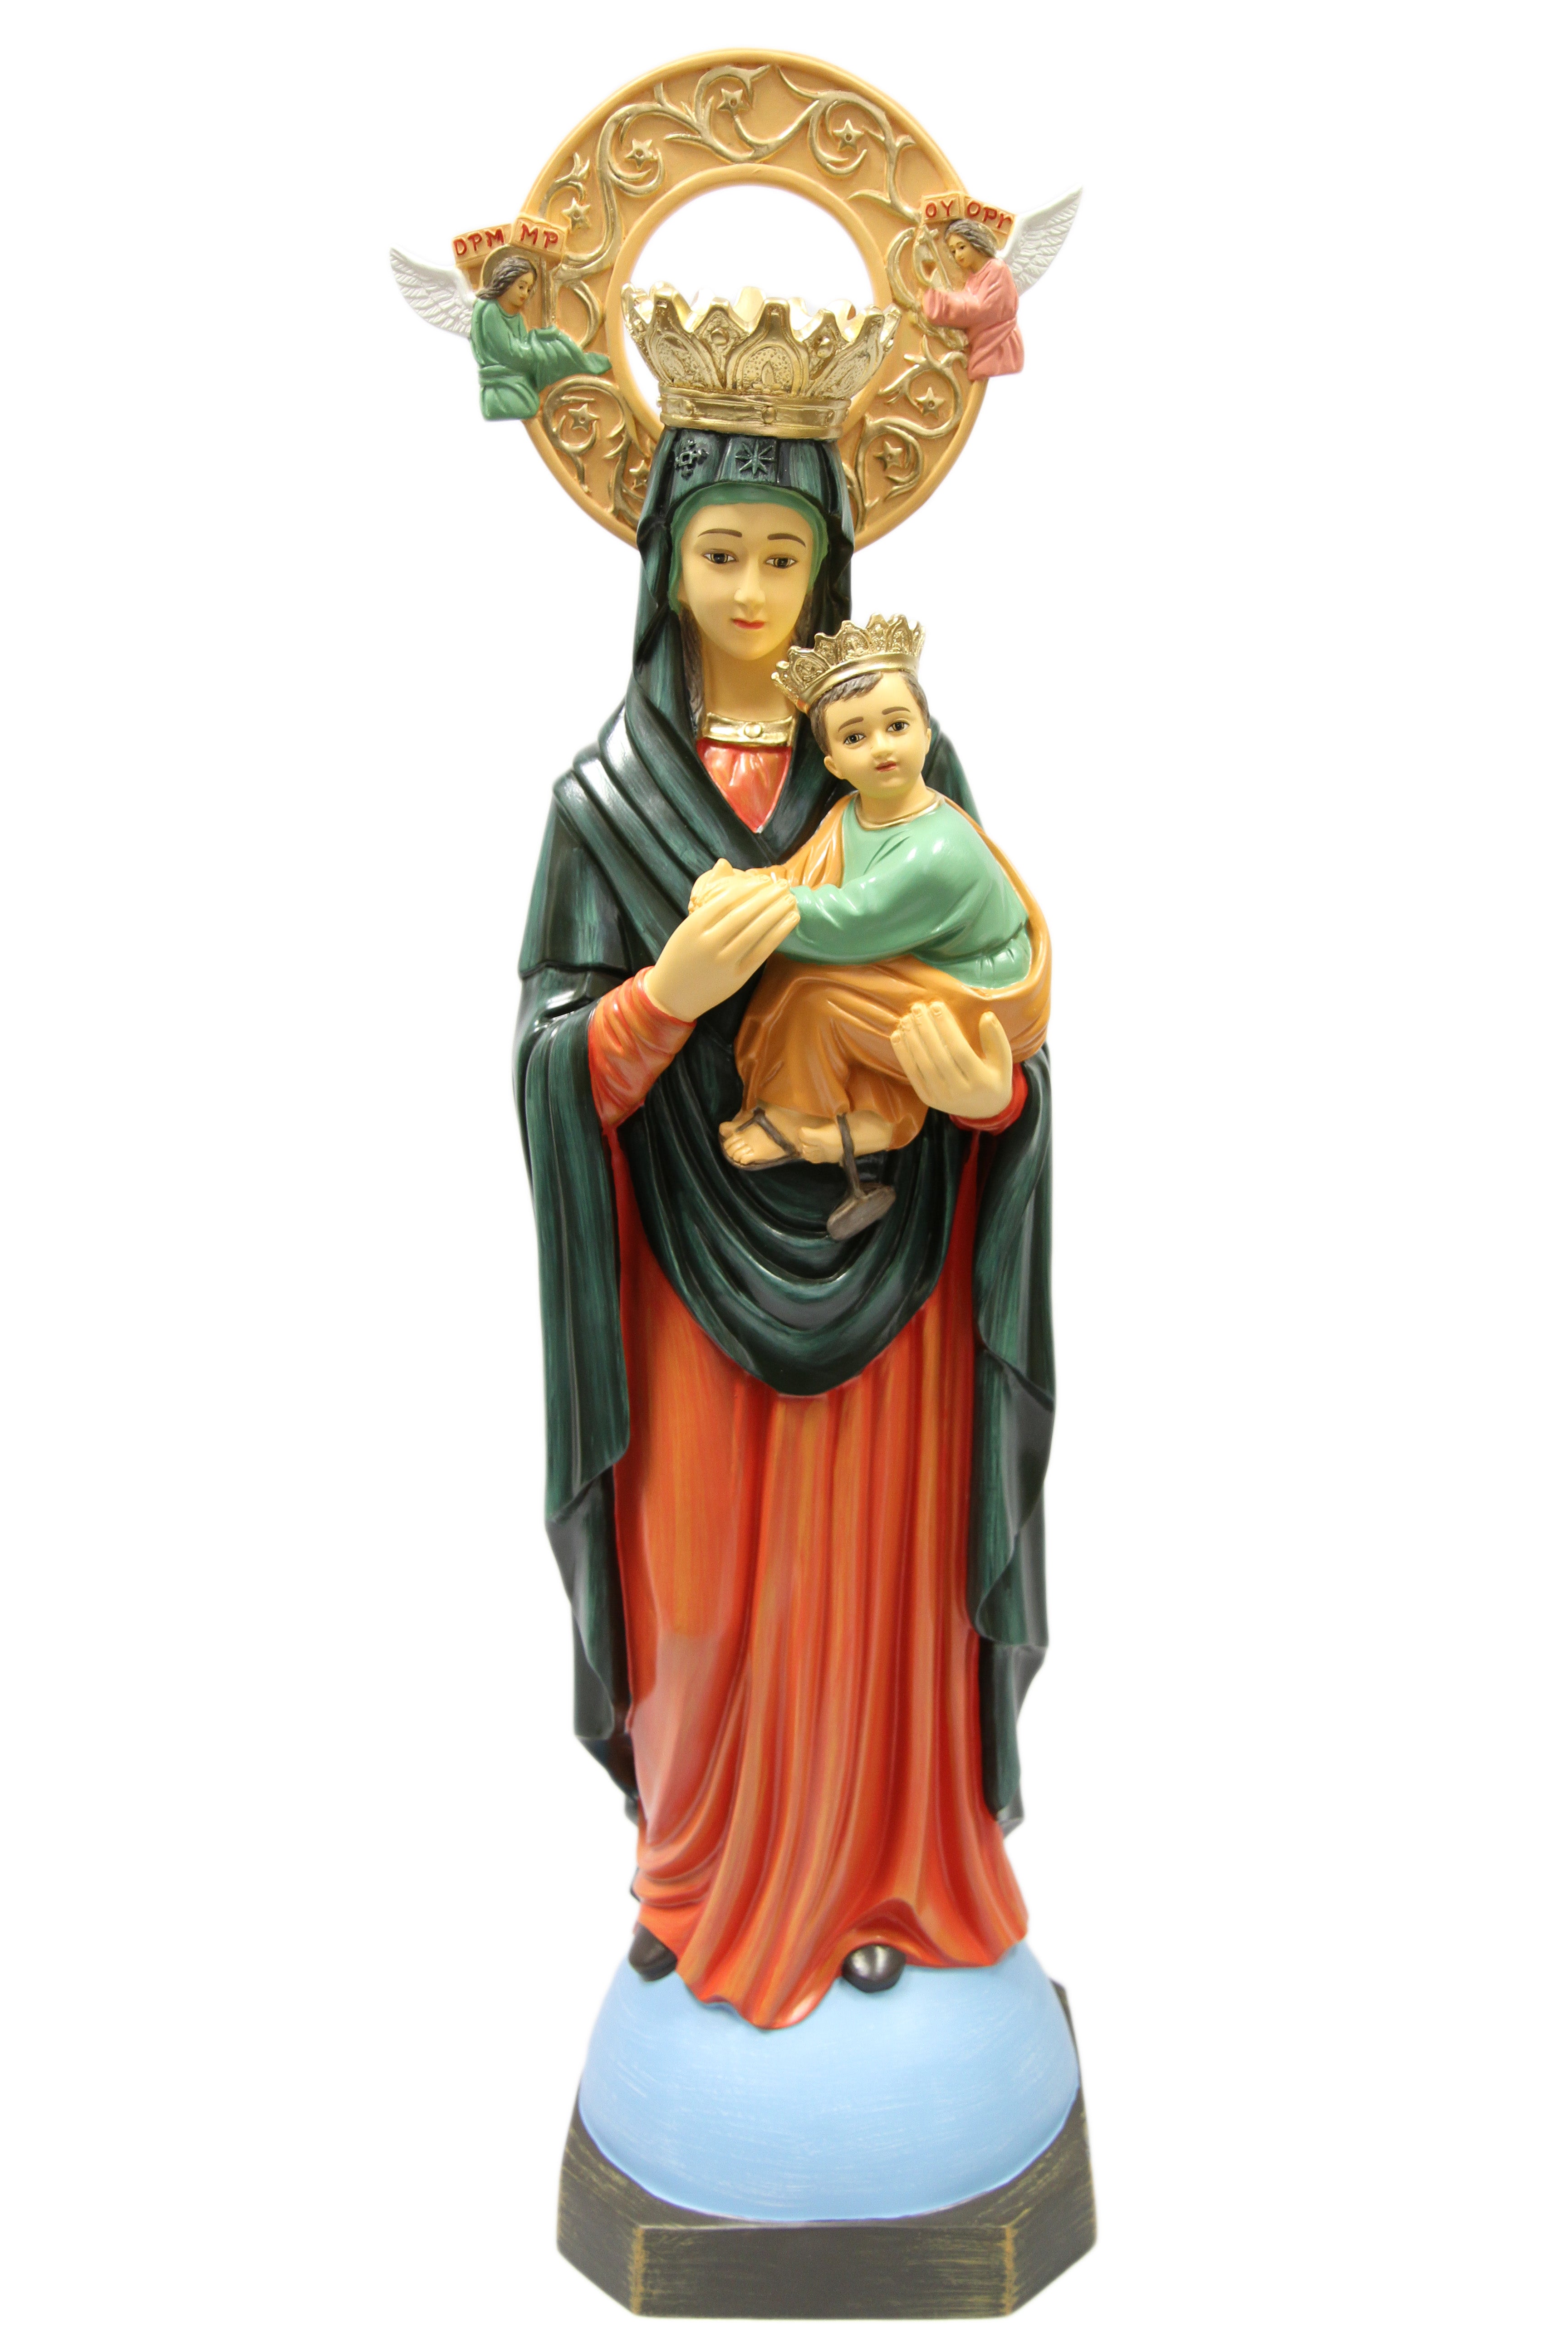 35 Inch Our Lady of Perpetual Help Catholic Statue Sculpture Figurine Hand Painted